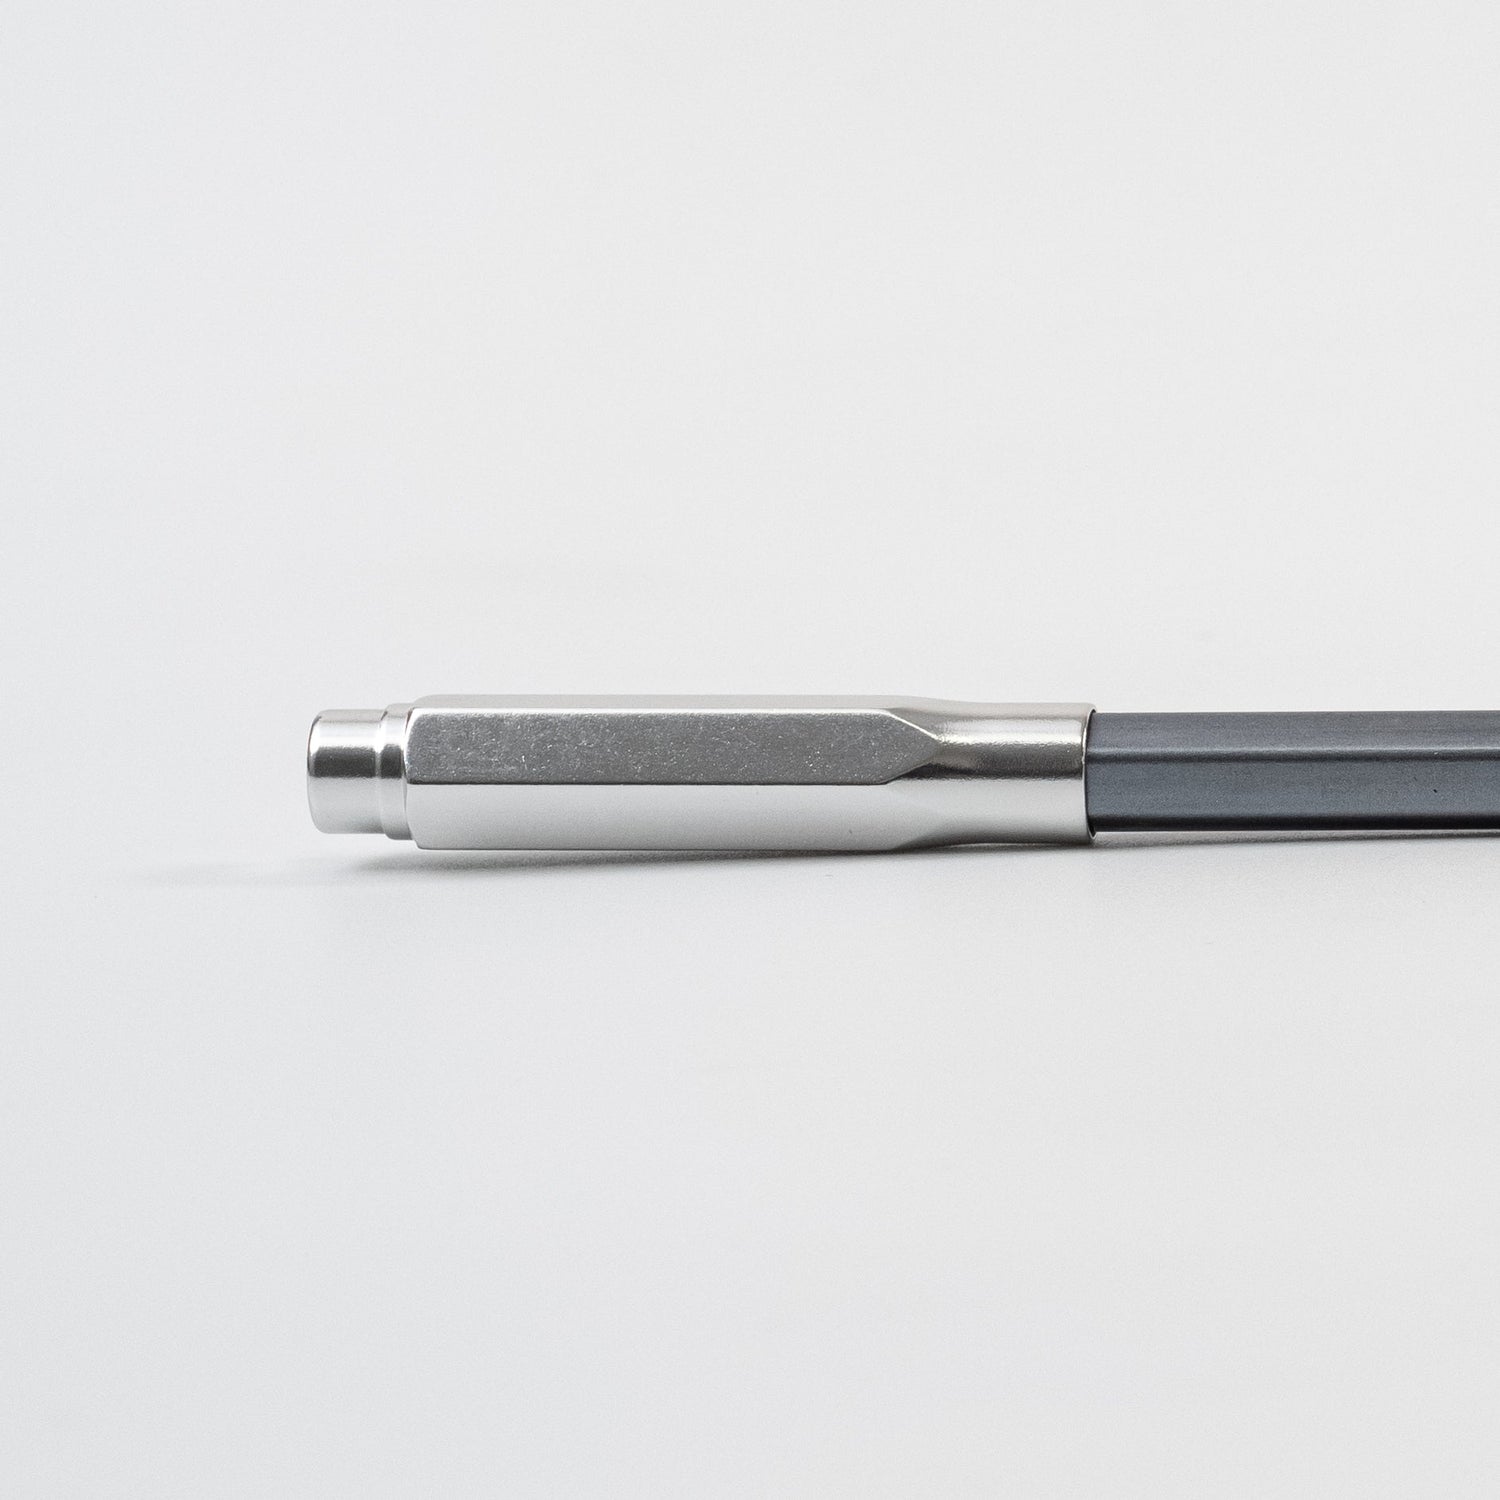 A black, gold, and silver Blackwing Point Guard sits on a white surface next to a Blackwing pencil.